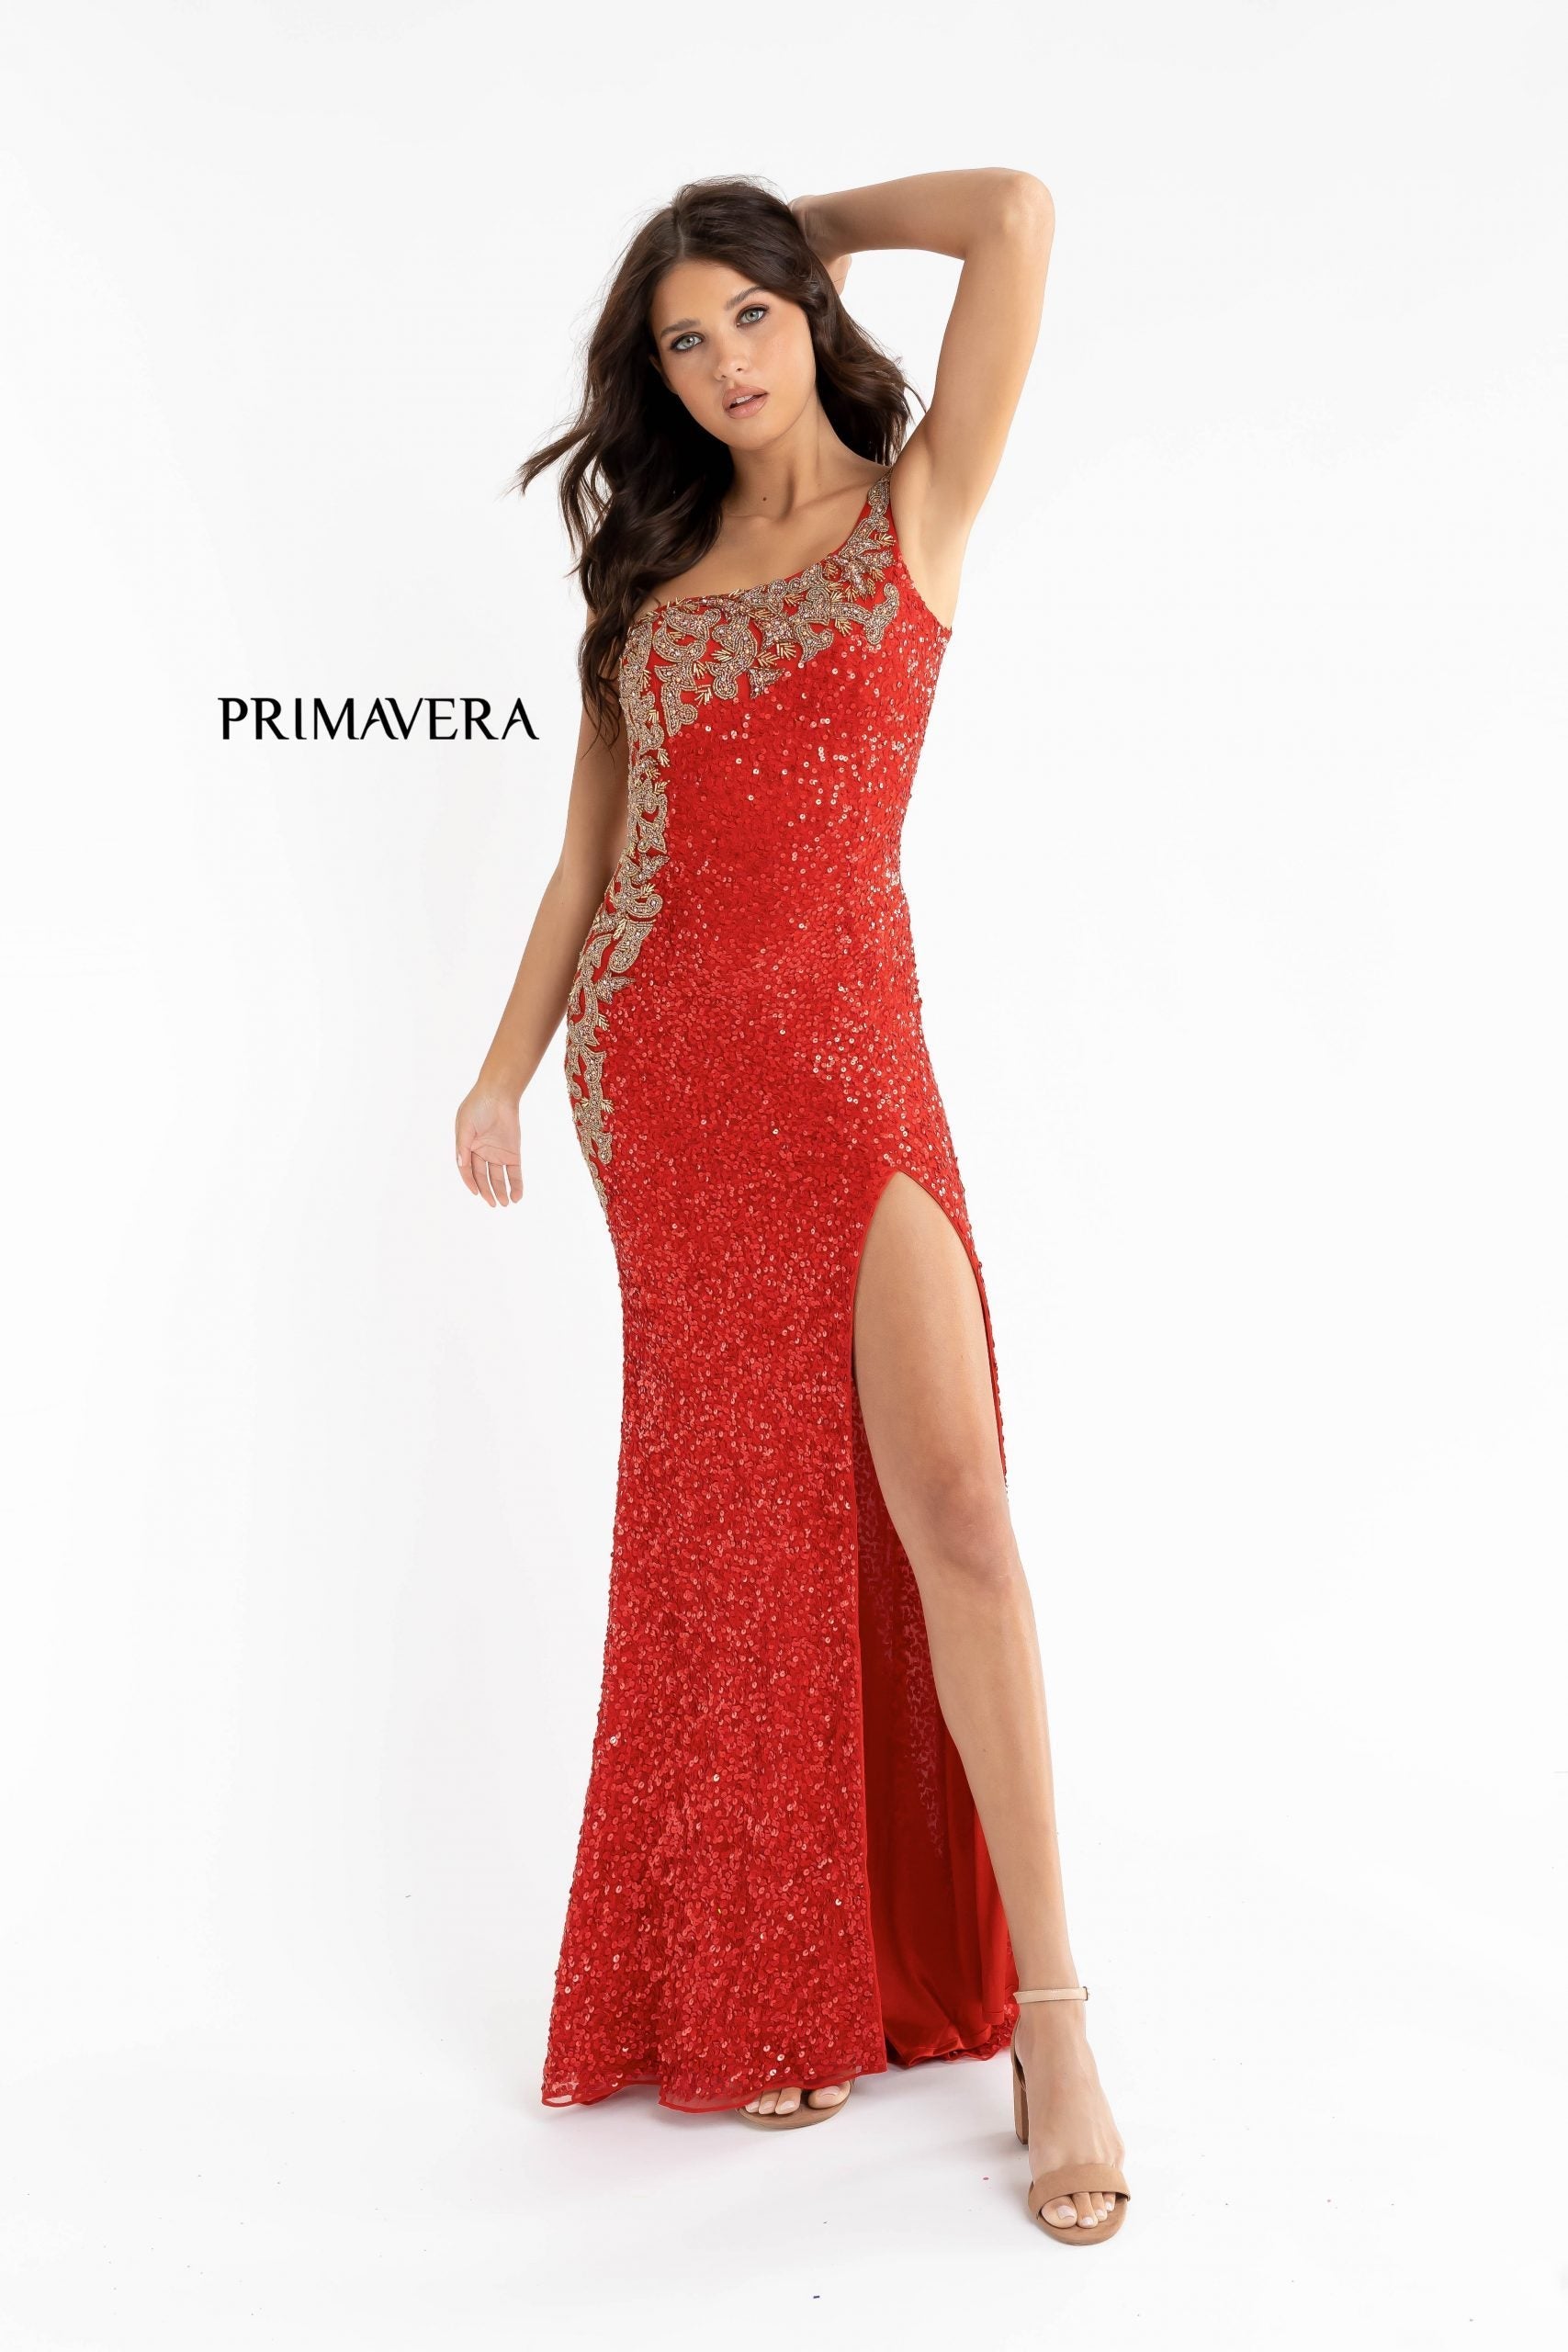 Primavera Couture 3637 is a stunning Long Fitted Sequin Embellished Formal Evening Gown. This One Shoulder Prom Dress Features Beaded Embellishments cascading from the one shoulder neckline down the side of the gown along the hip. Slit in skirt with a sweeping train. Great Pageant Formal Style.